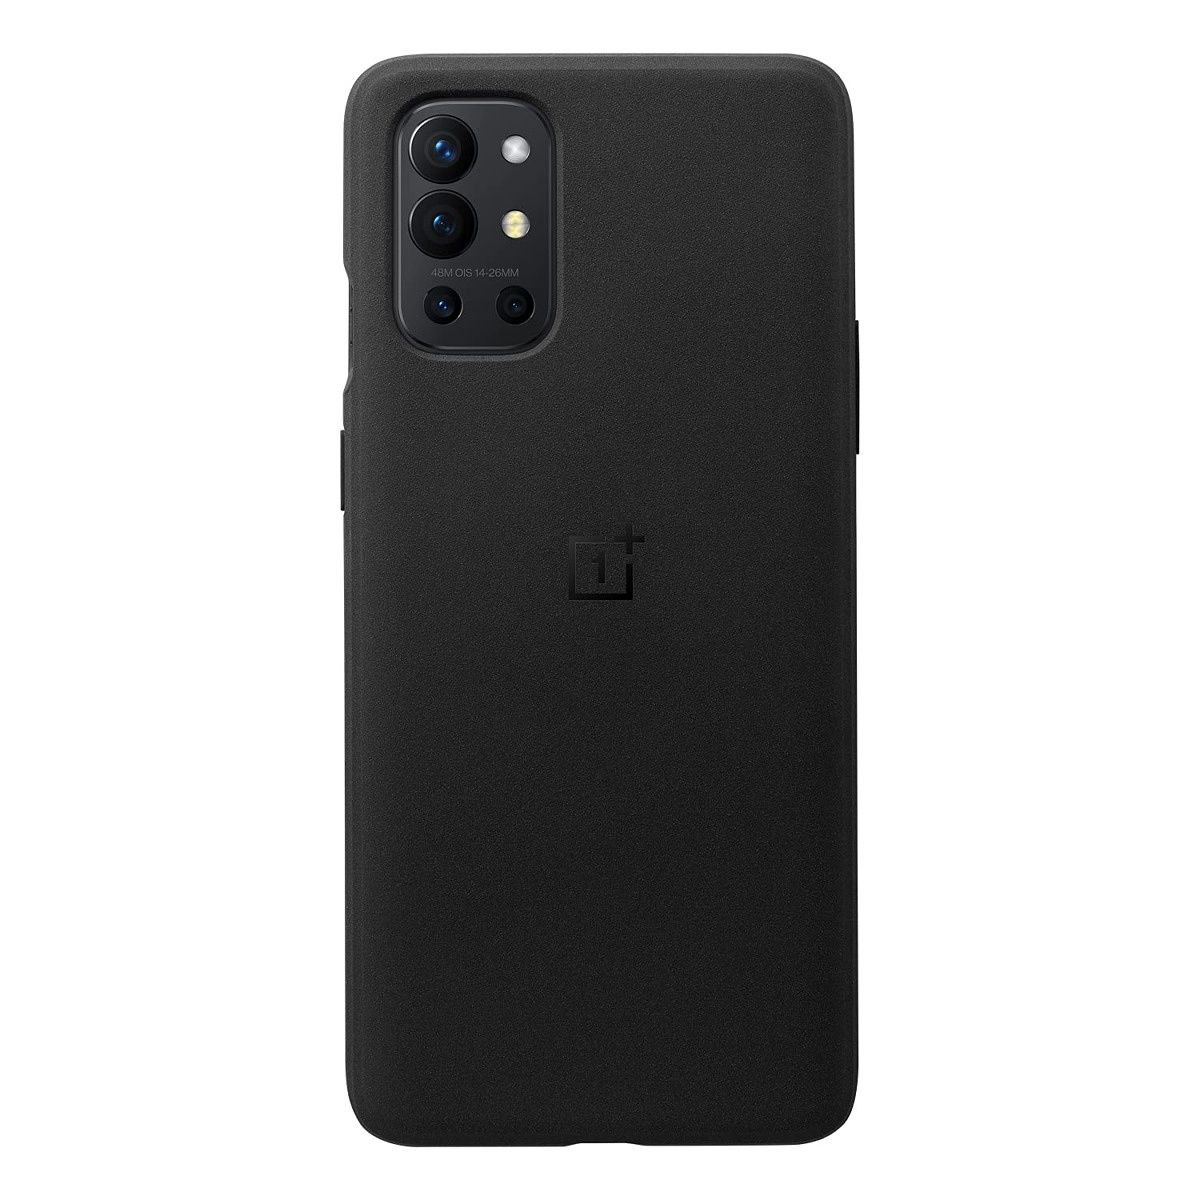 This case from OnePlus tries to mimic the sandstone back of the OnePlus One and offers a nice grip while holding the phone. Offers good protection from drops too.